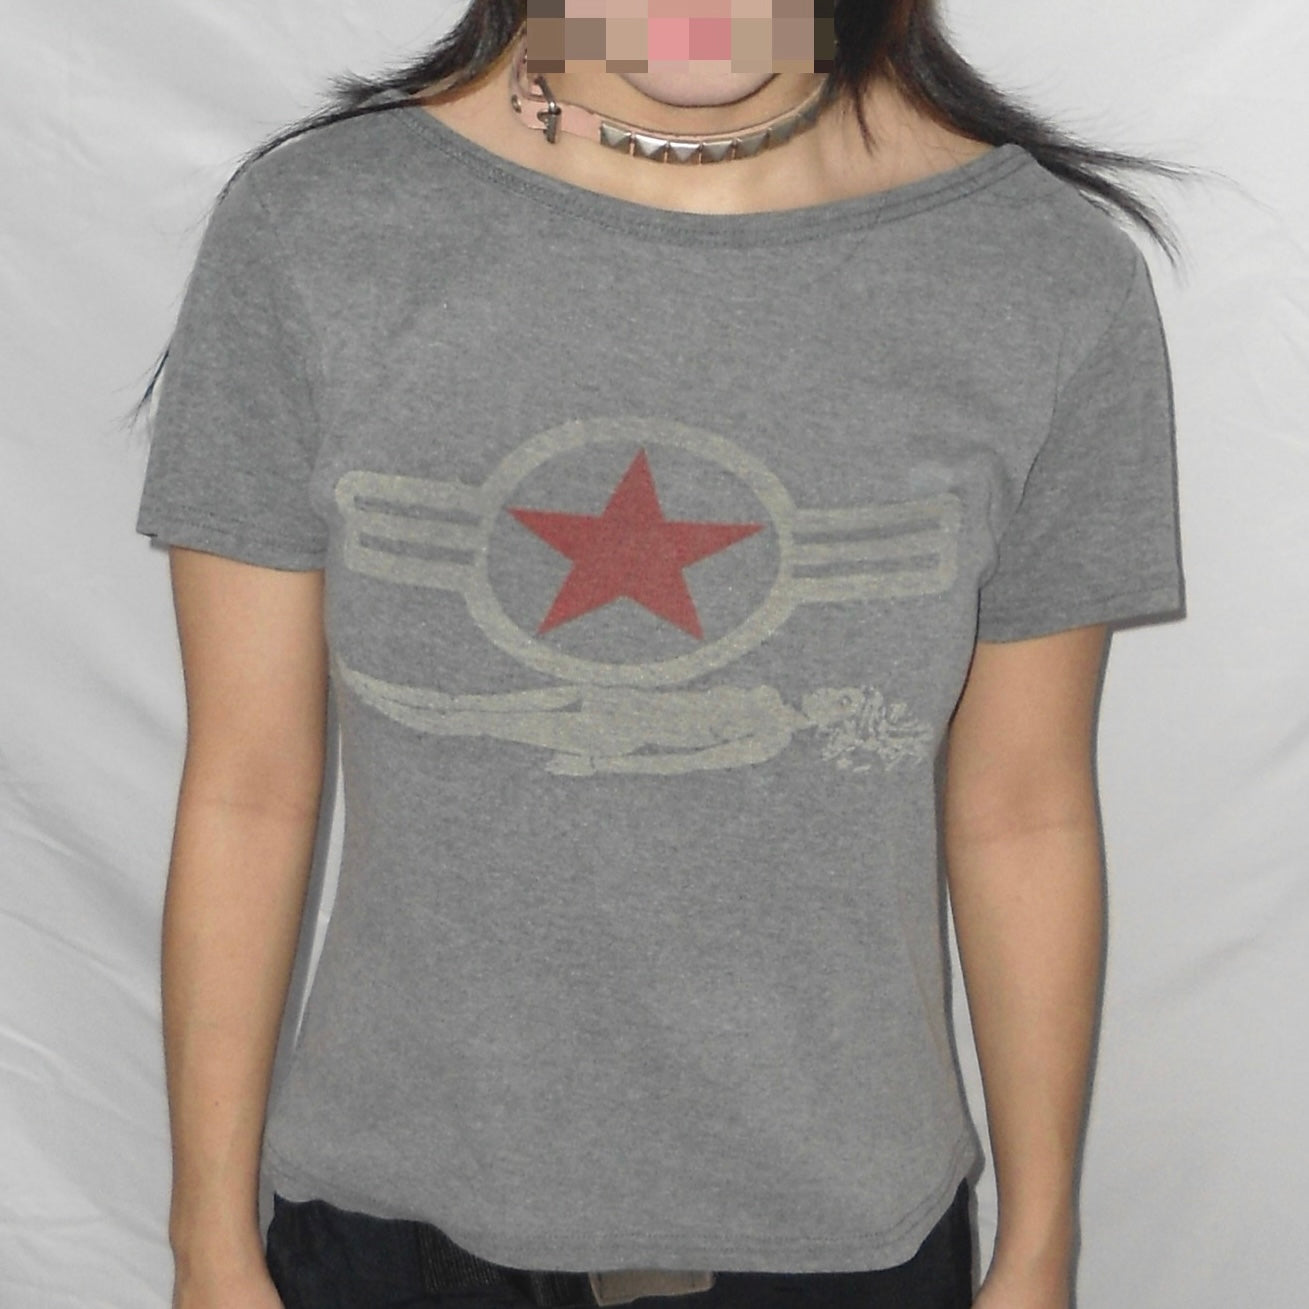 Hysteric Glamour star tee